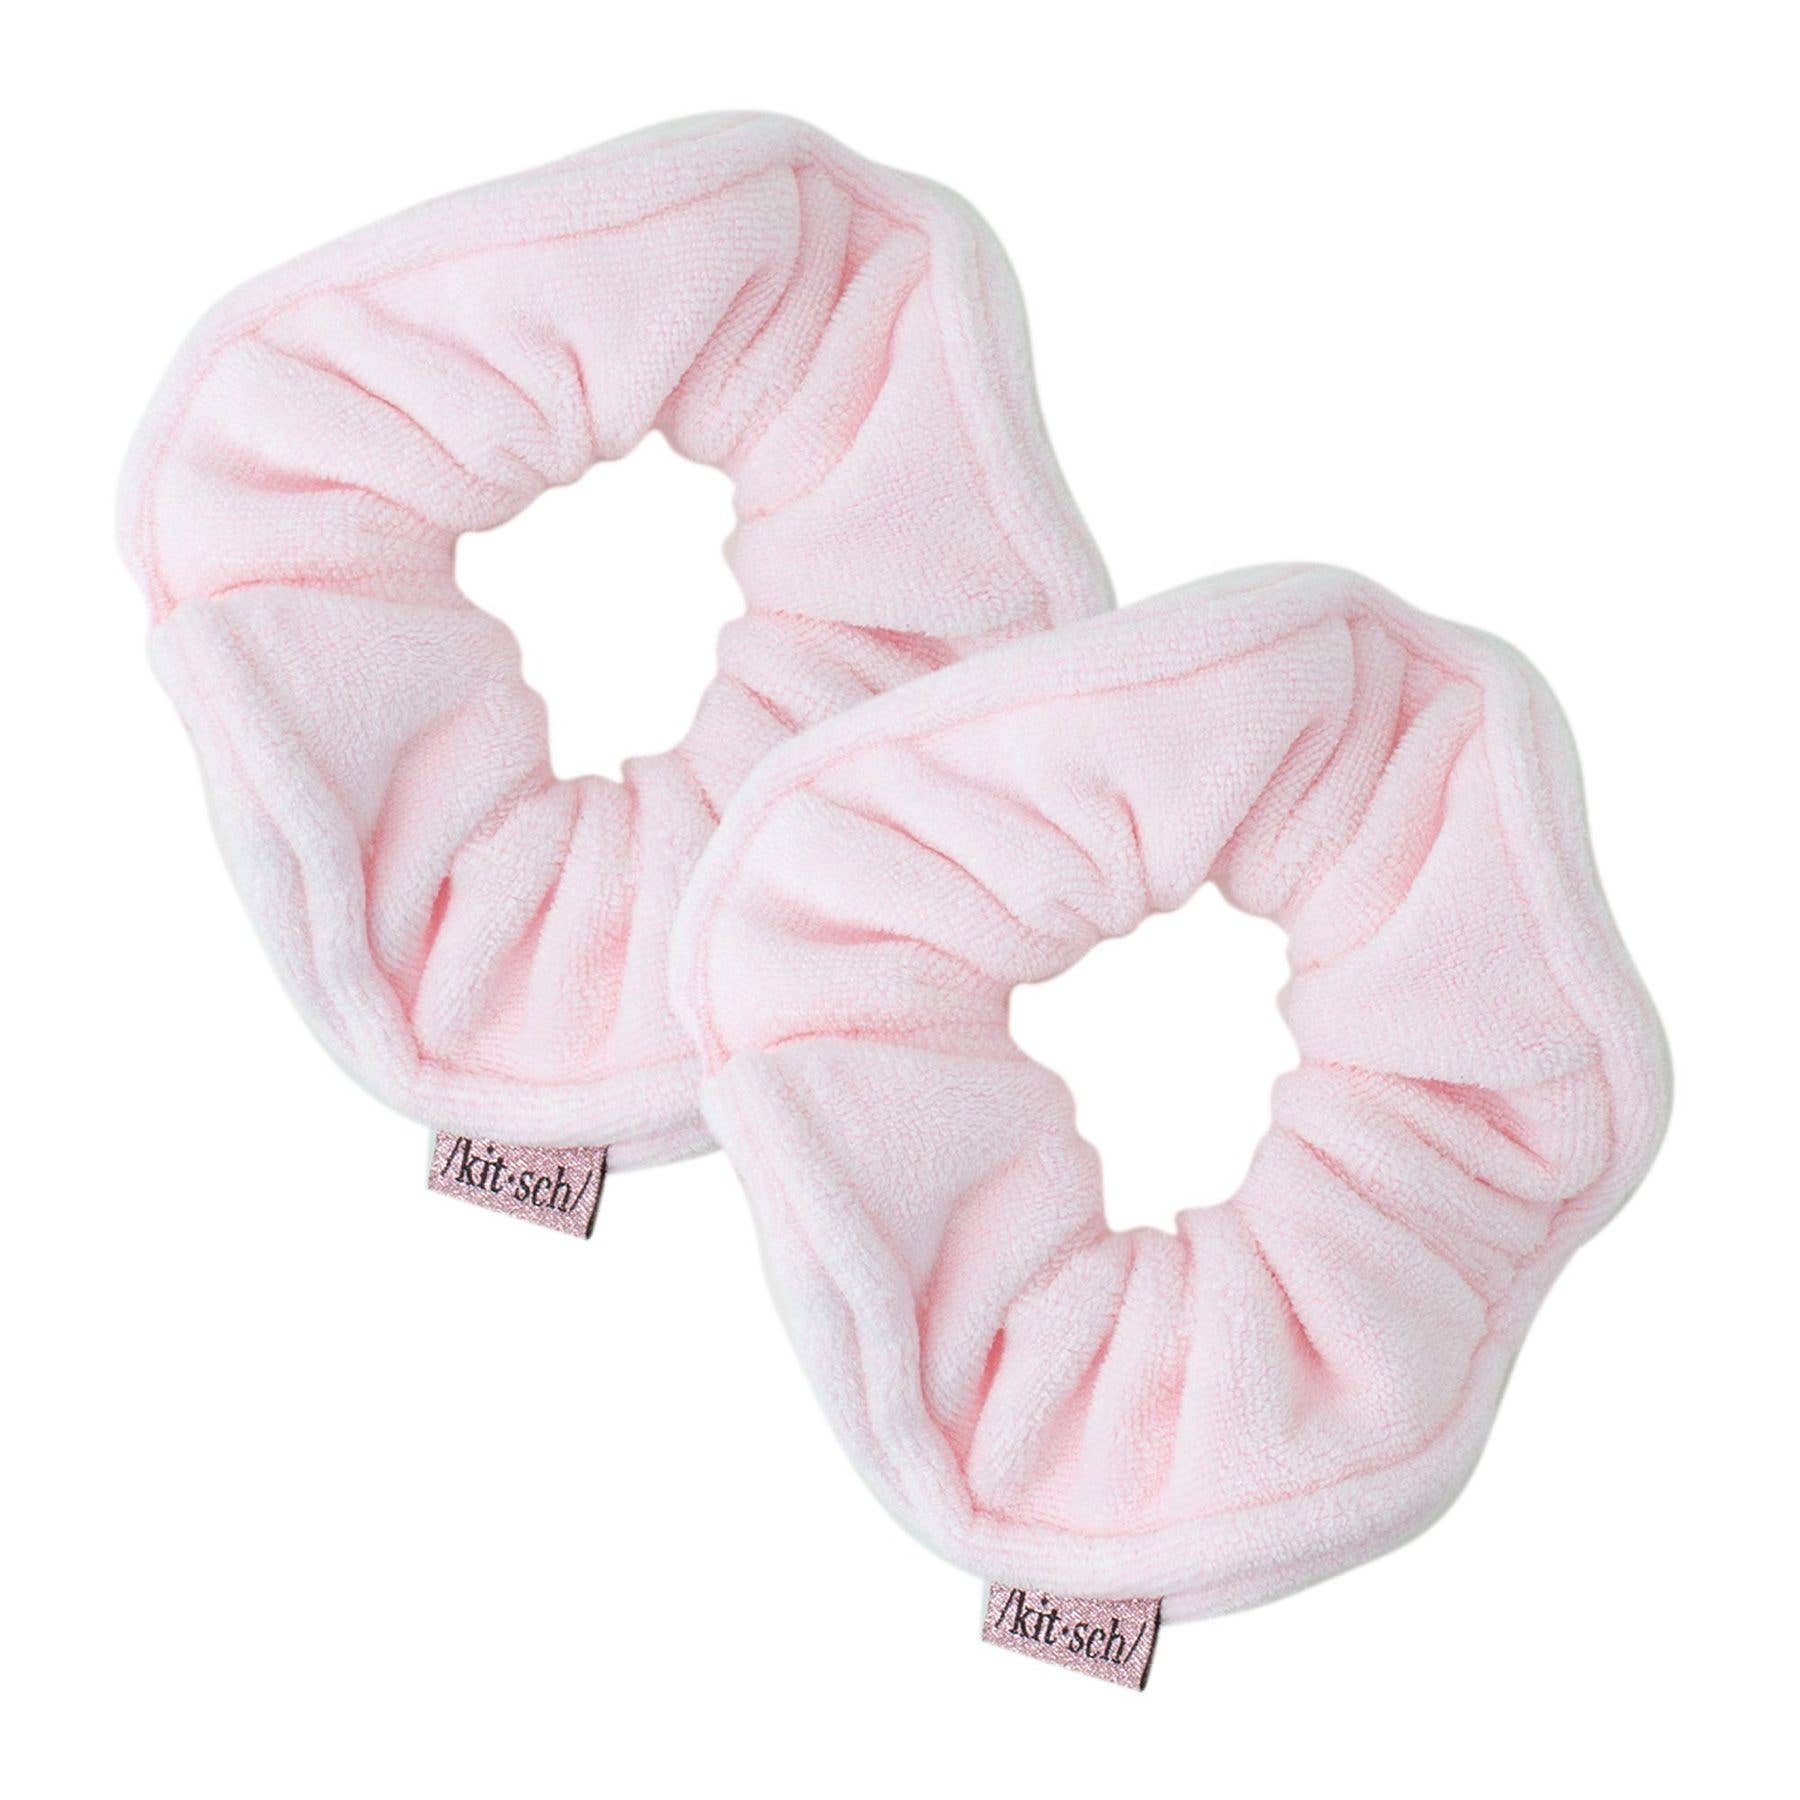 Microfiber Scrunchies - Package of 2 Kitsch Microfiber Towel Hair Scrunchies with Travel Pouch  Kitsch   